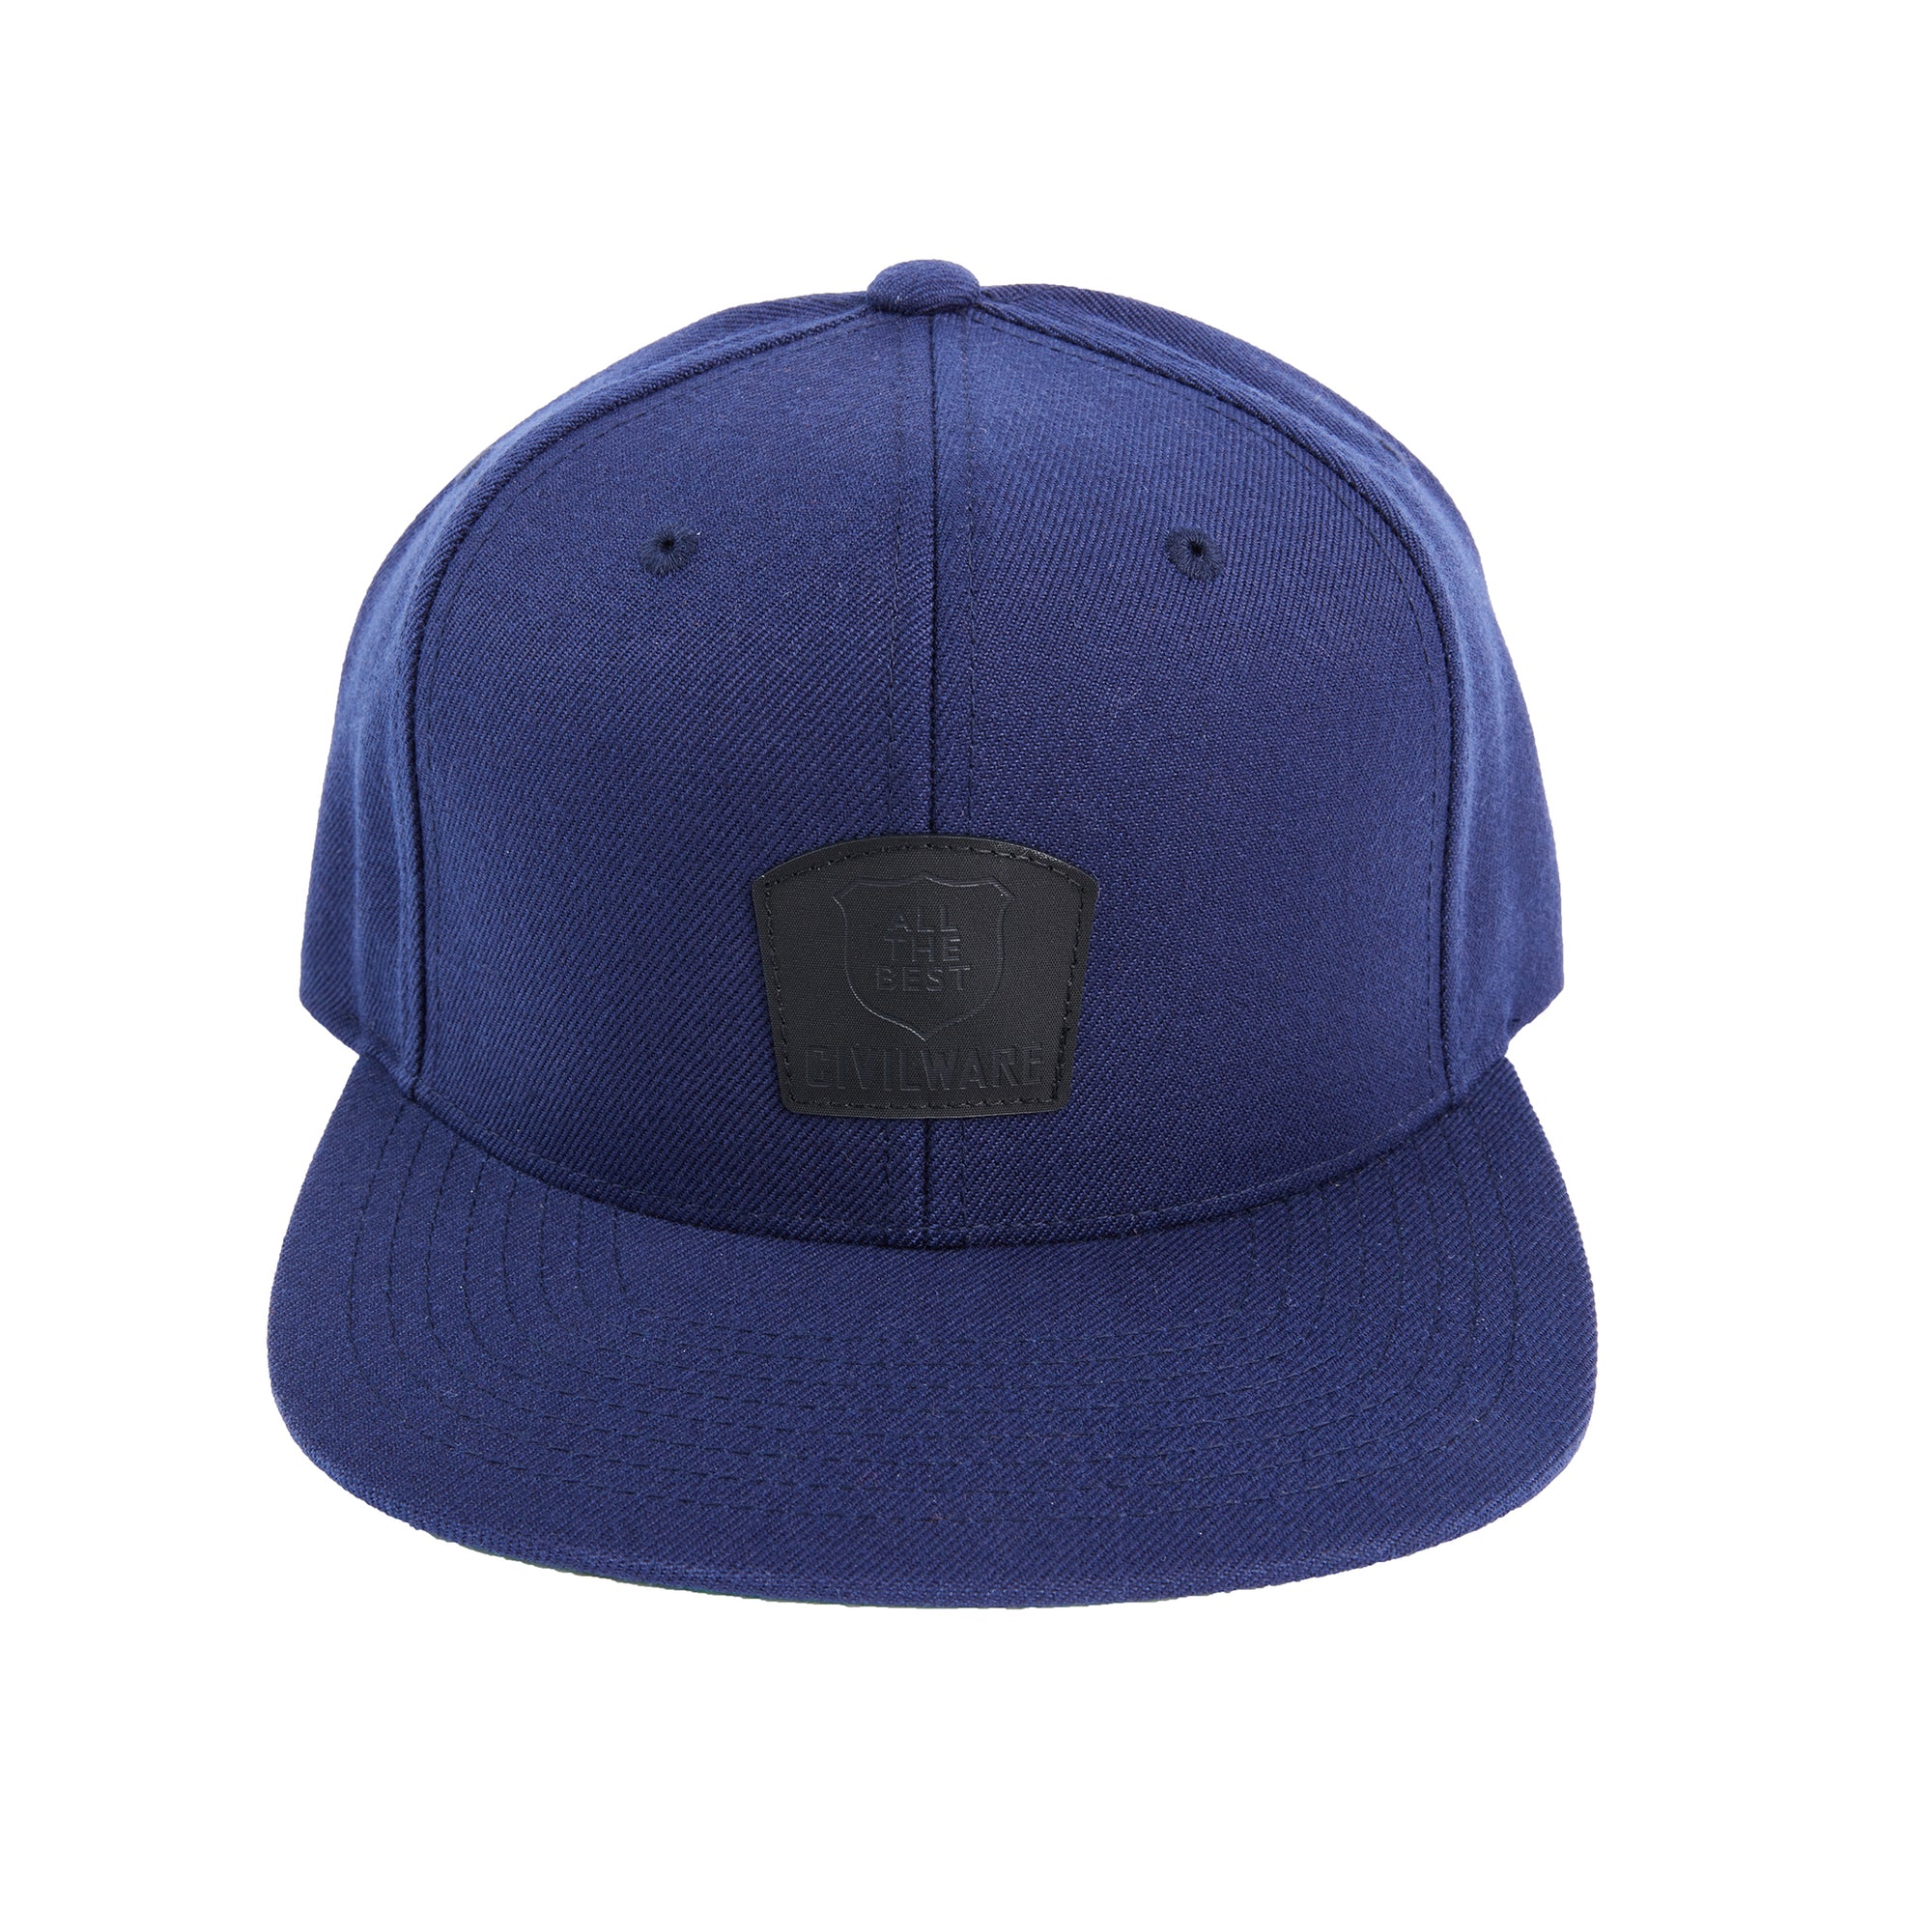 Guide Hat - Navy